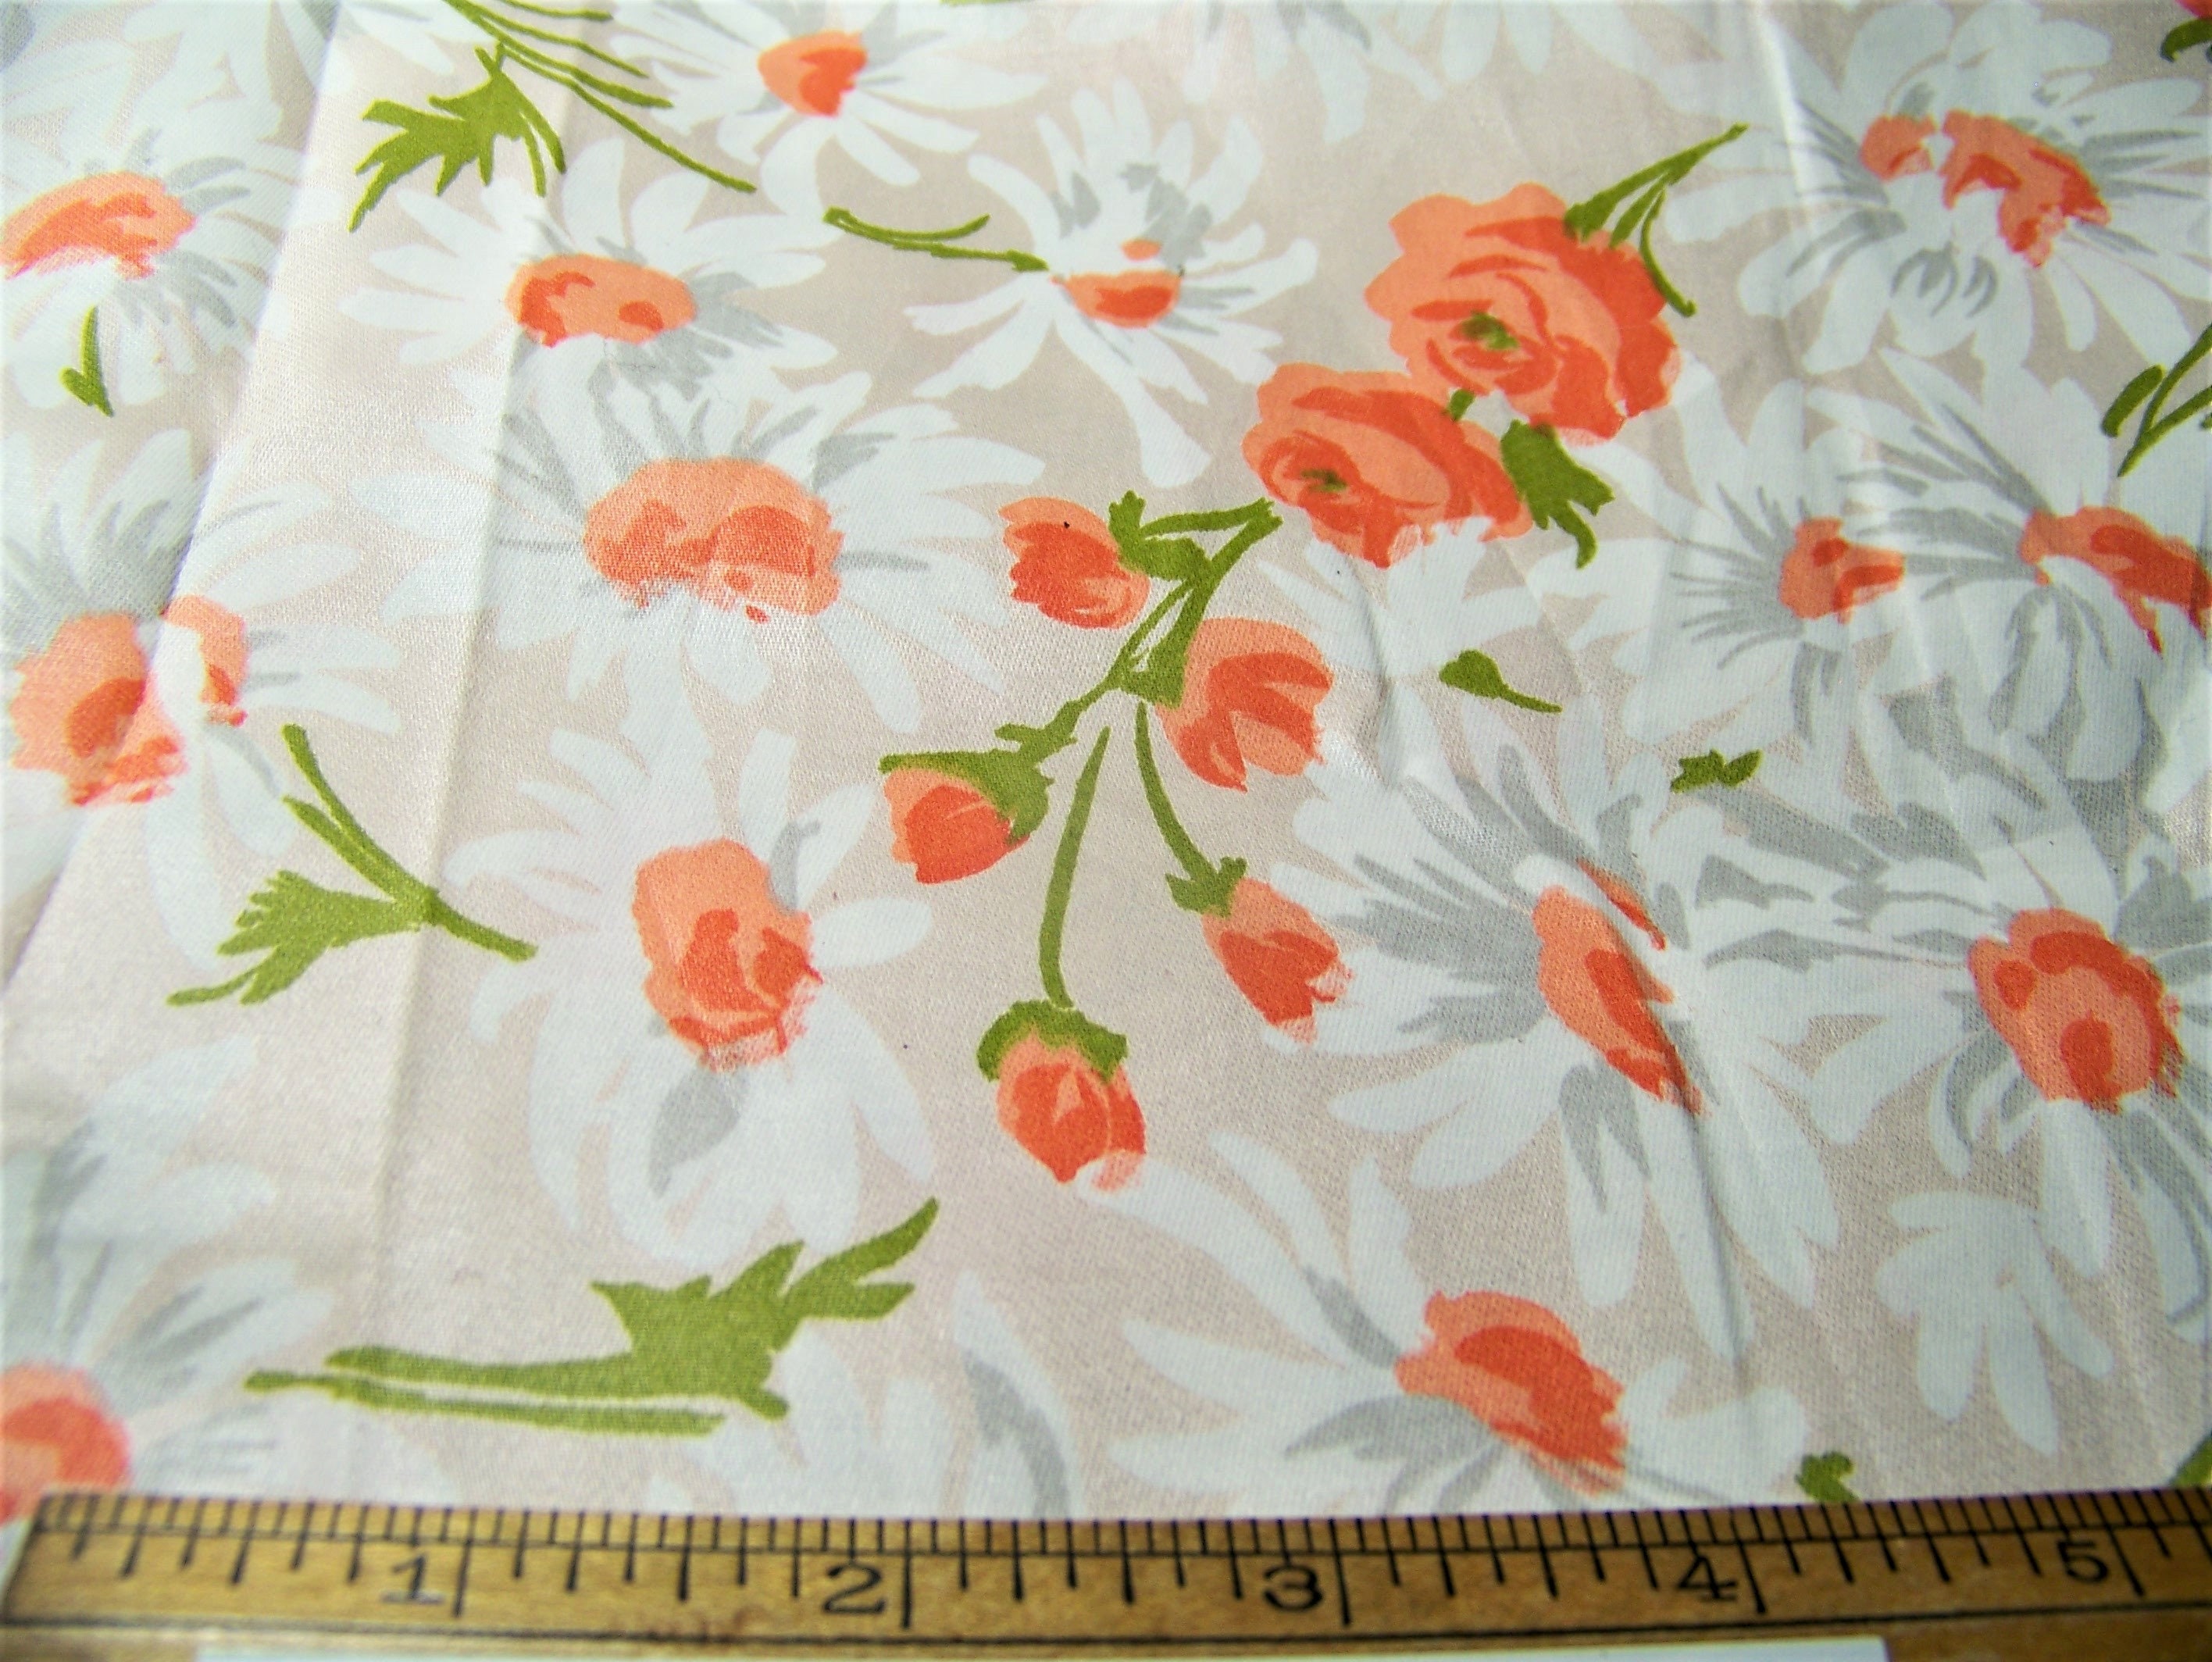 Vintage 1970's Blended Polished Cotton Fabric Daisy Floral Orange Coral Pink White Green4 5 Wide 36 Long Quilt Doll Clothes Invbt"